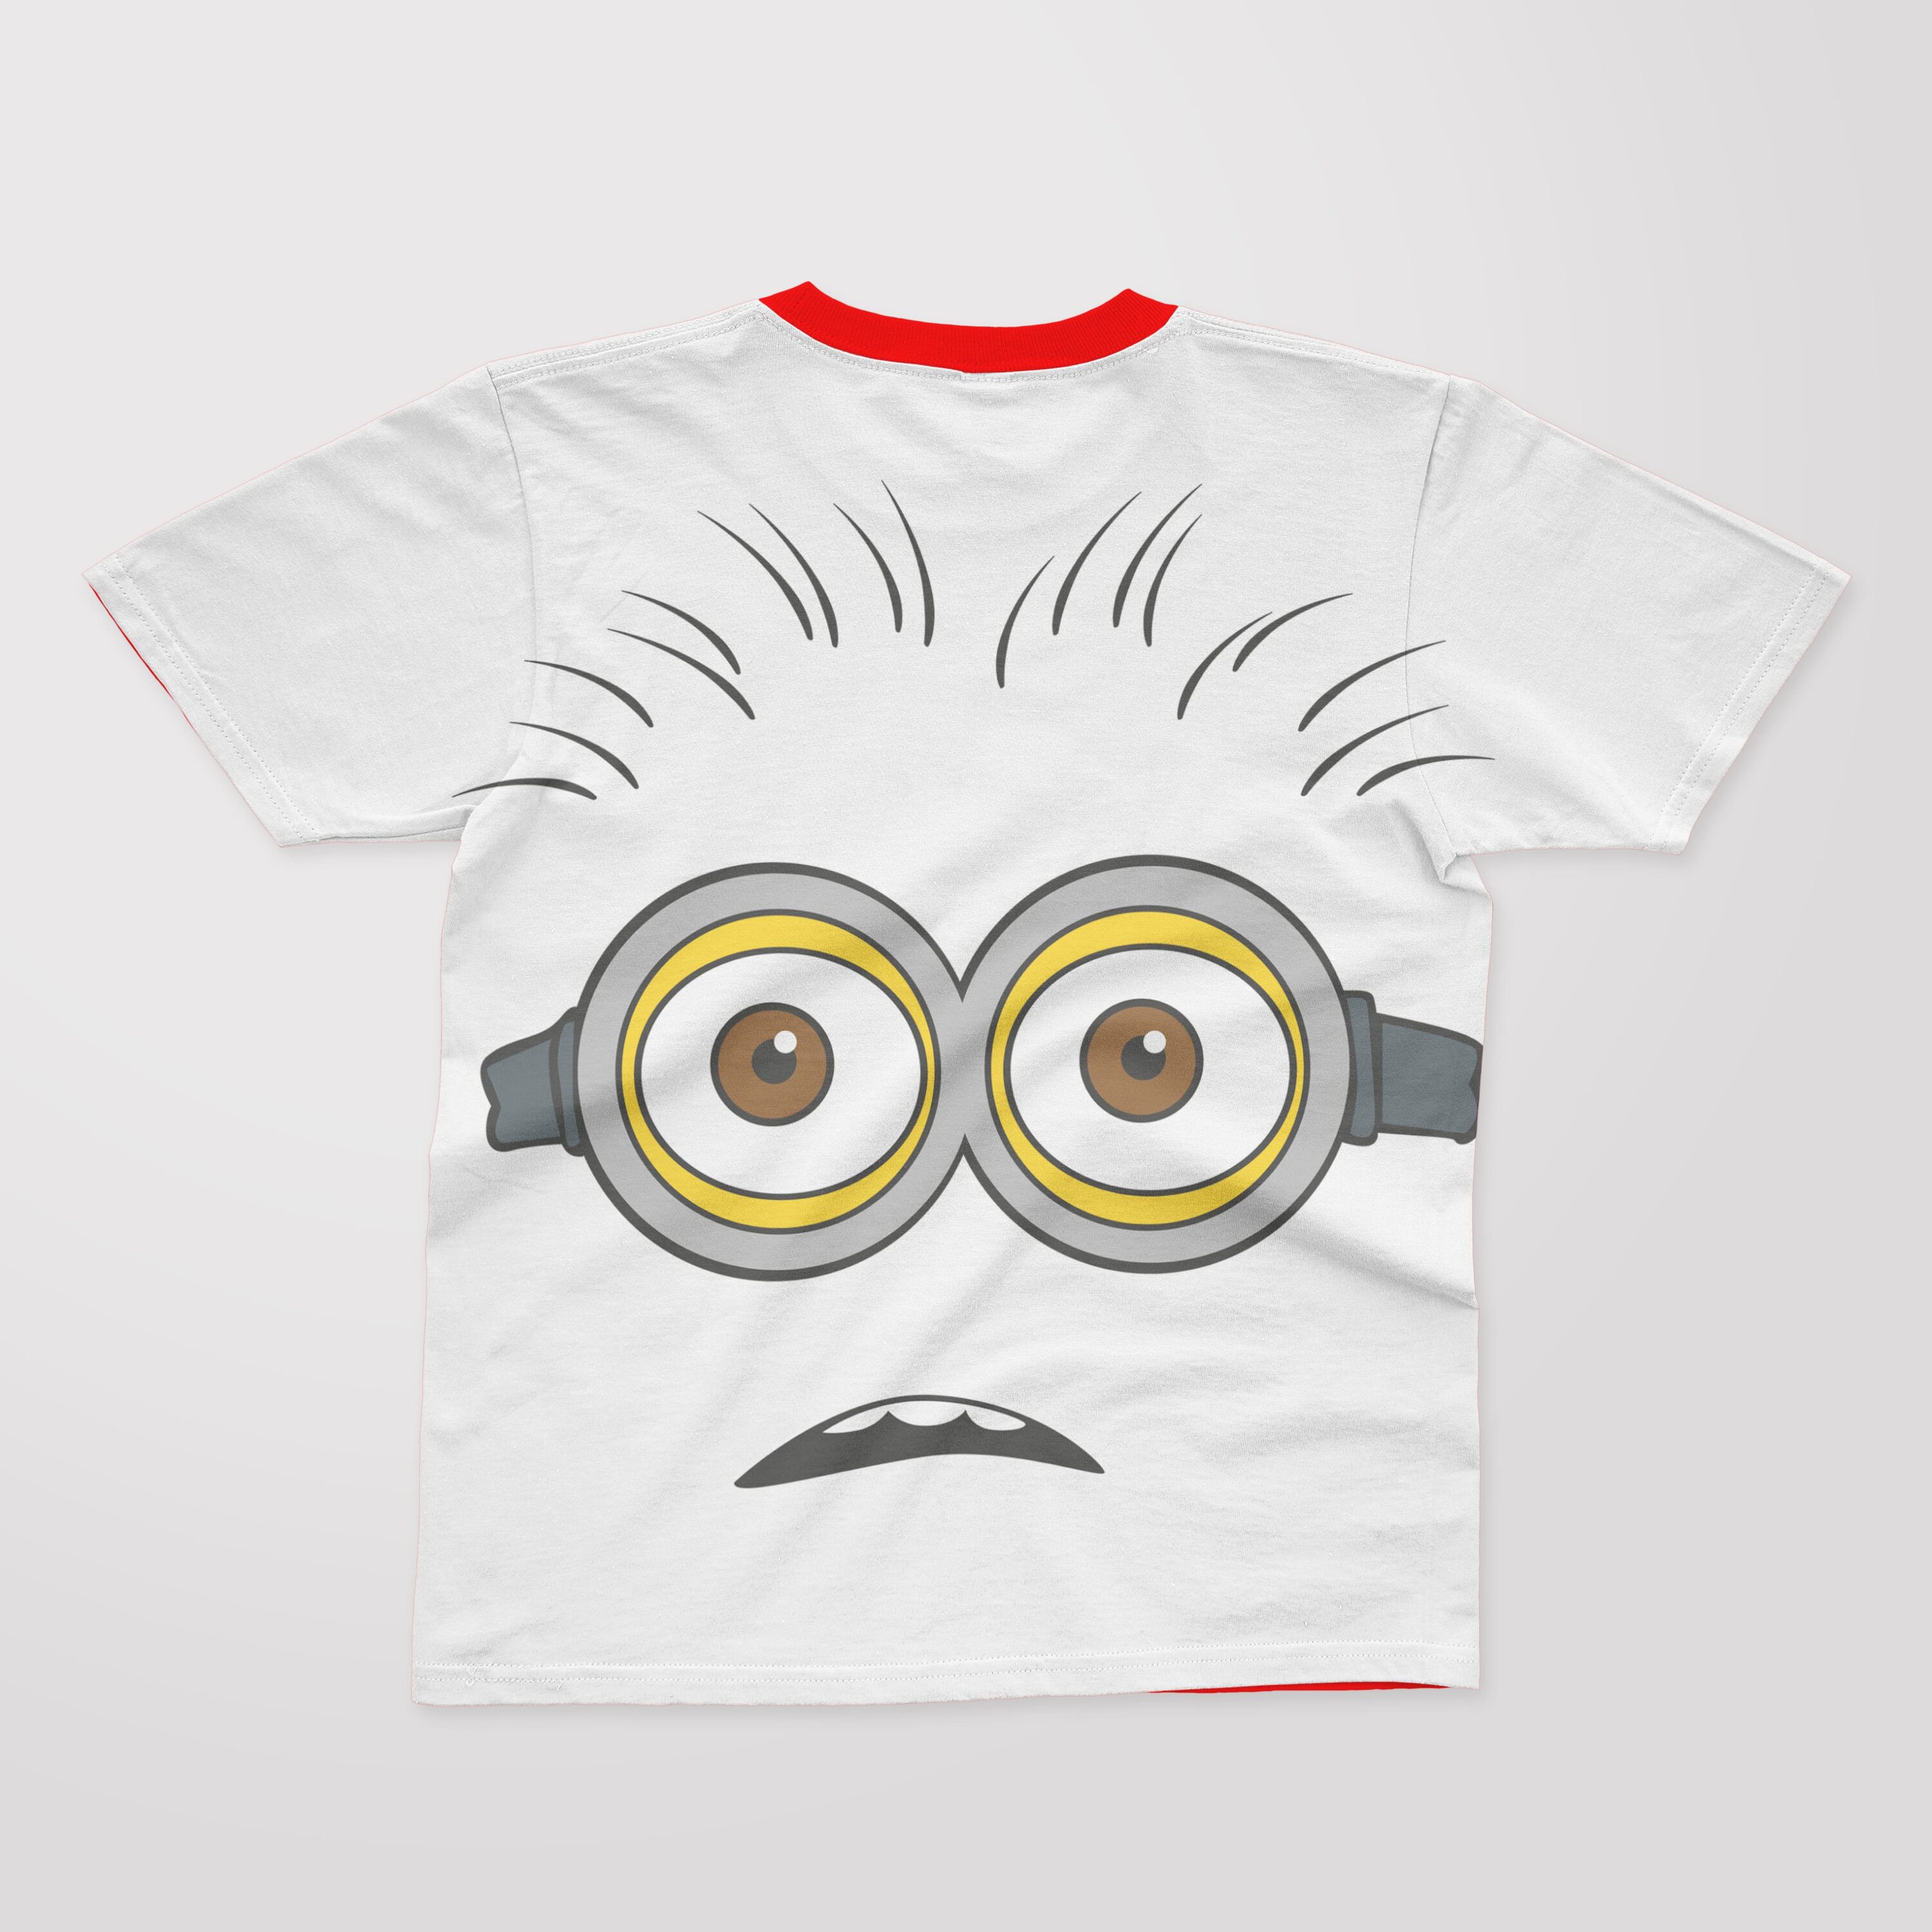 A white T-shirt with a red collar and a face of a puzzled minion.